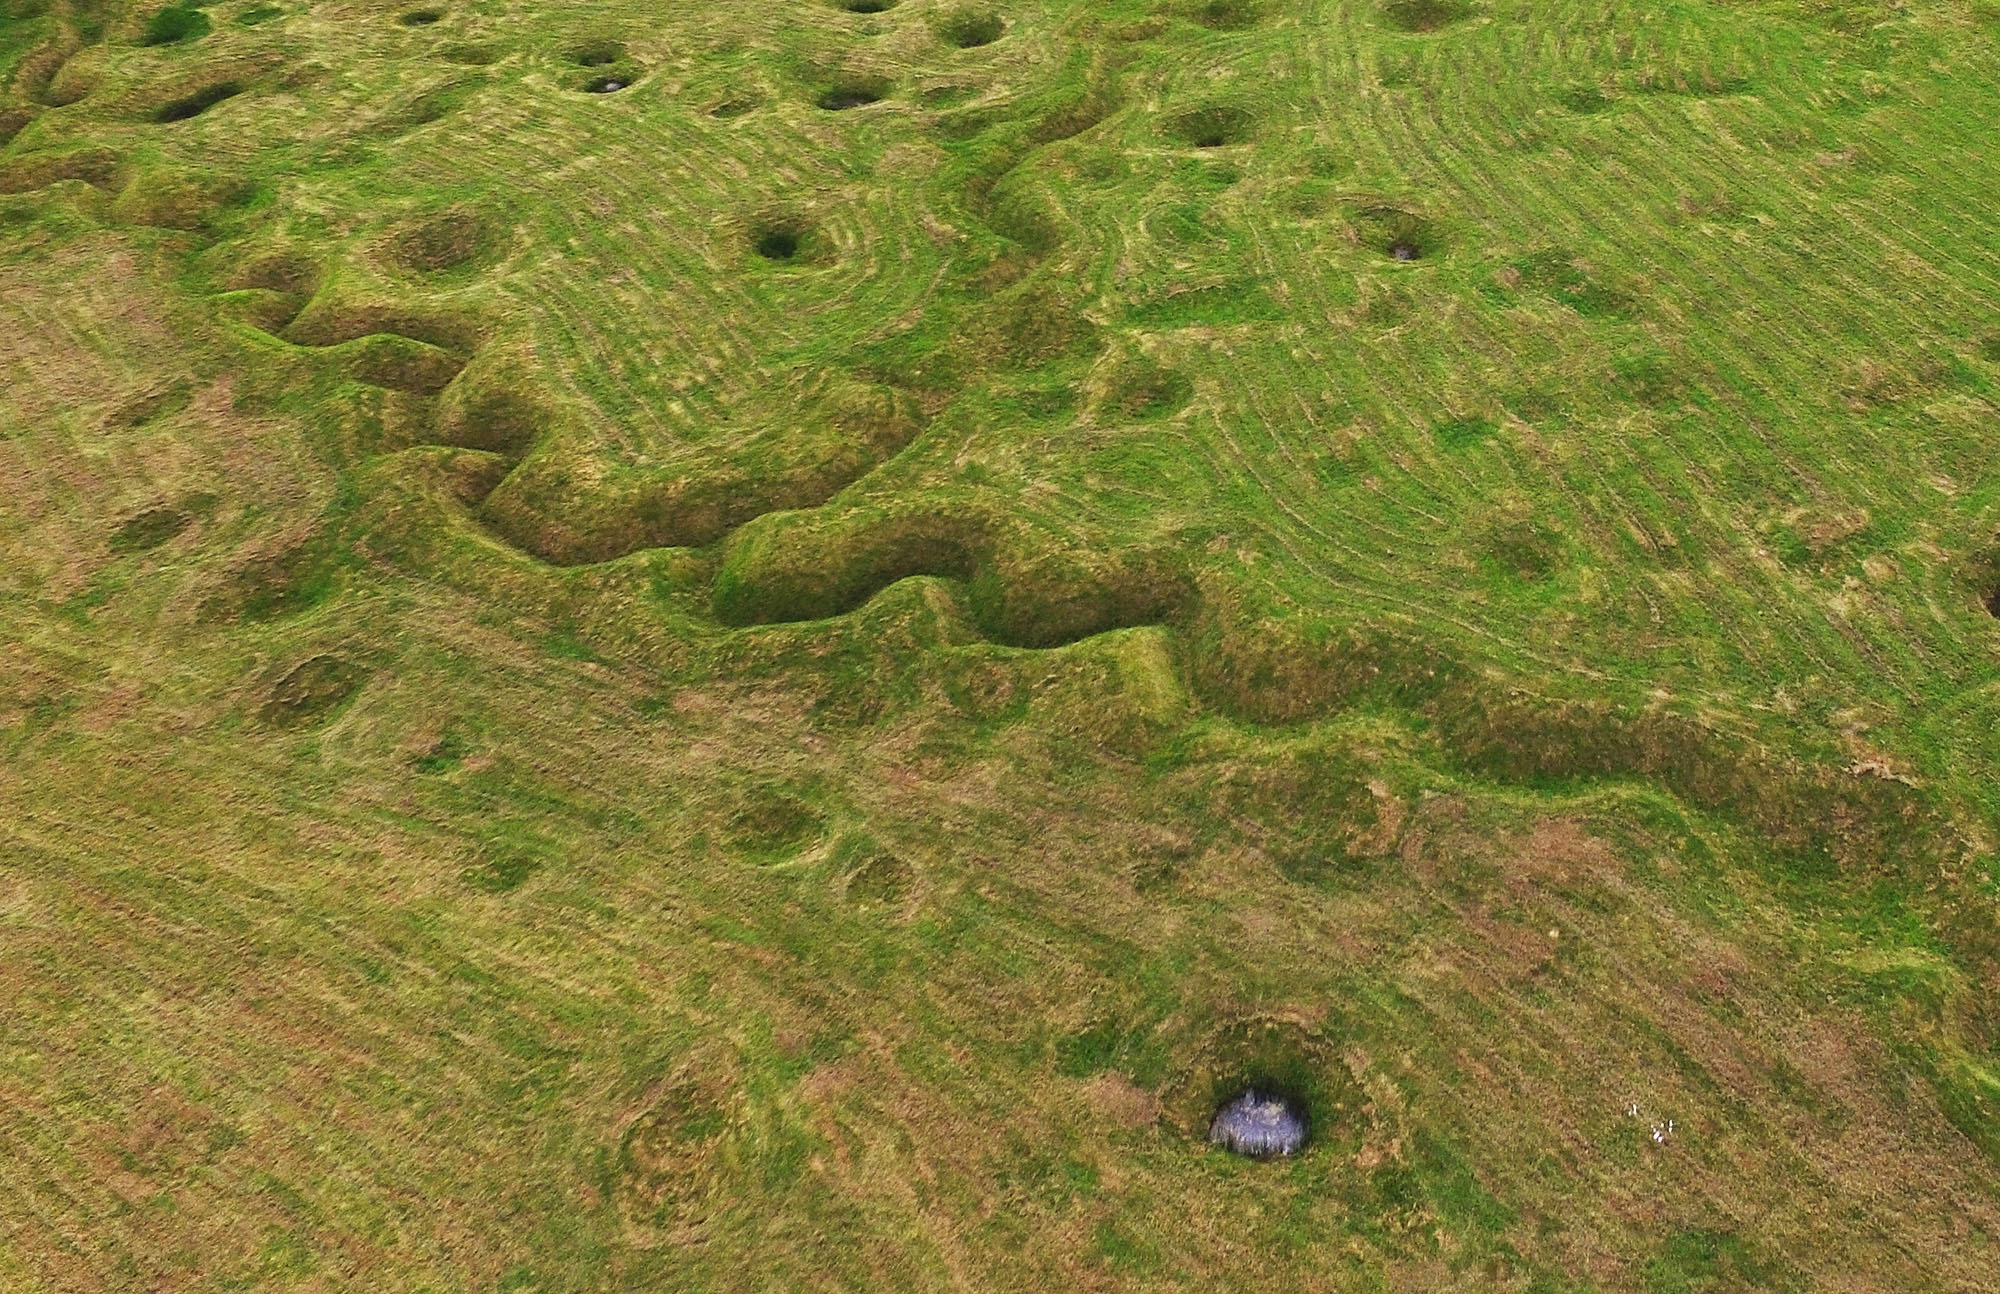 World War One Trenches Today